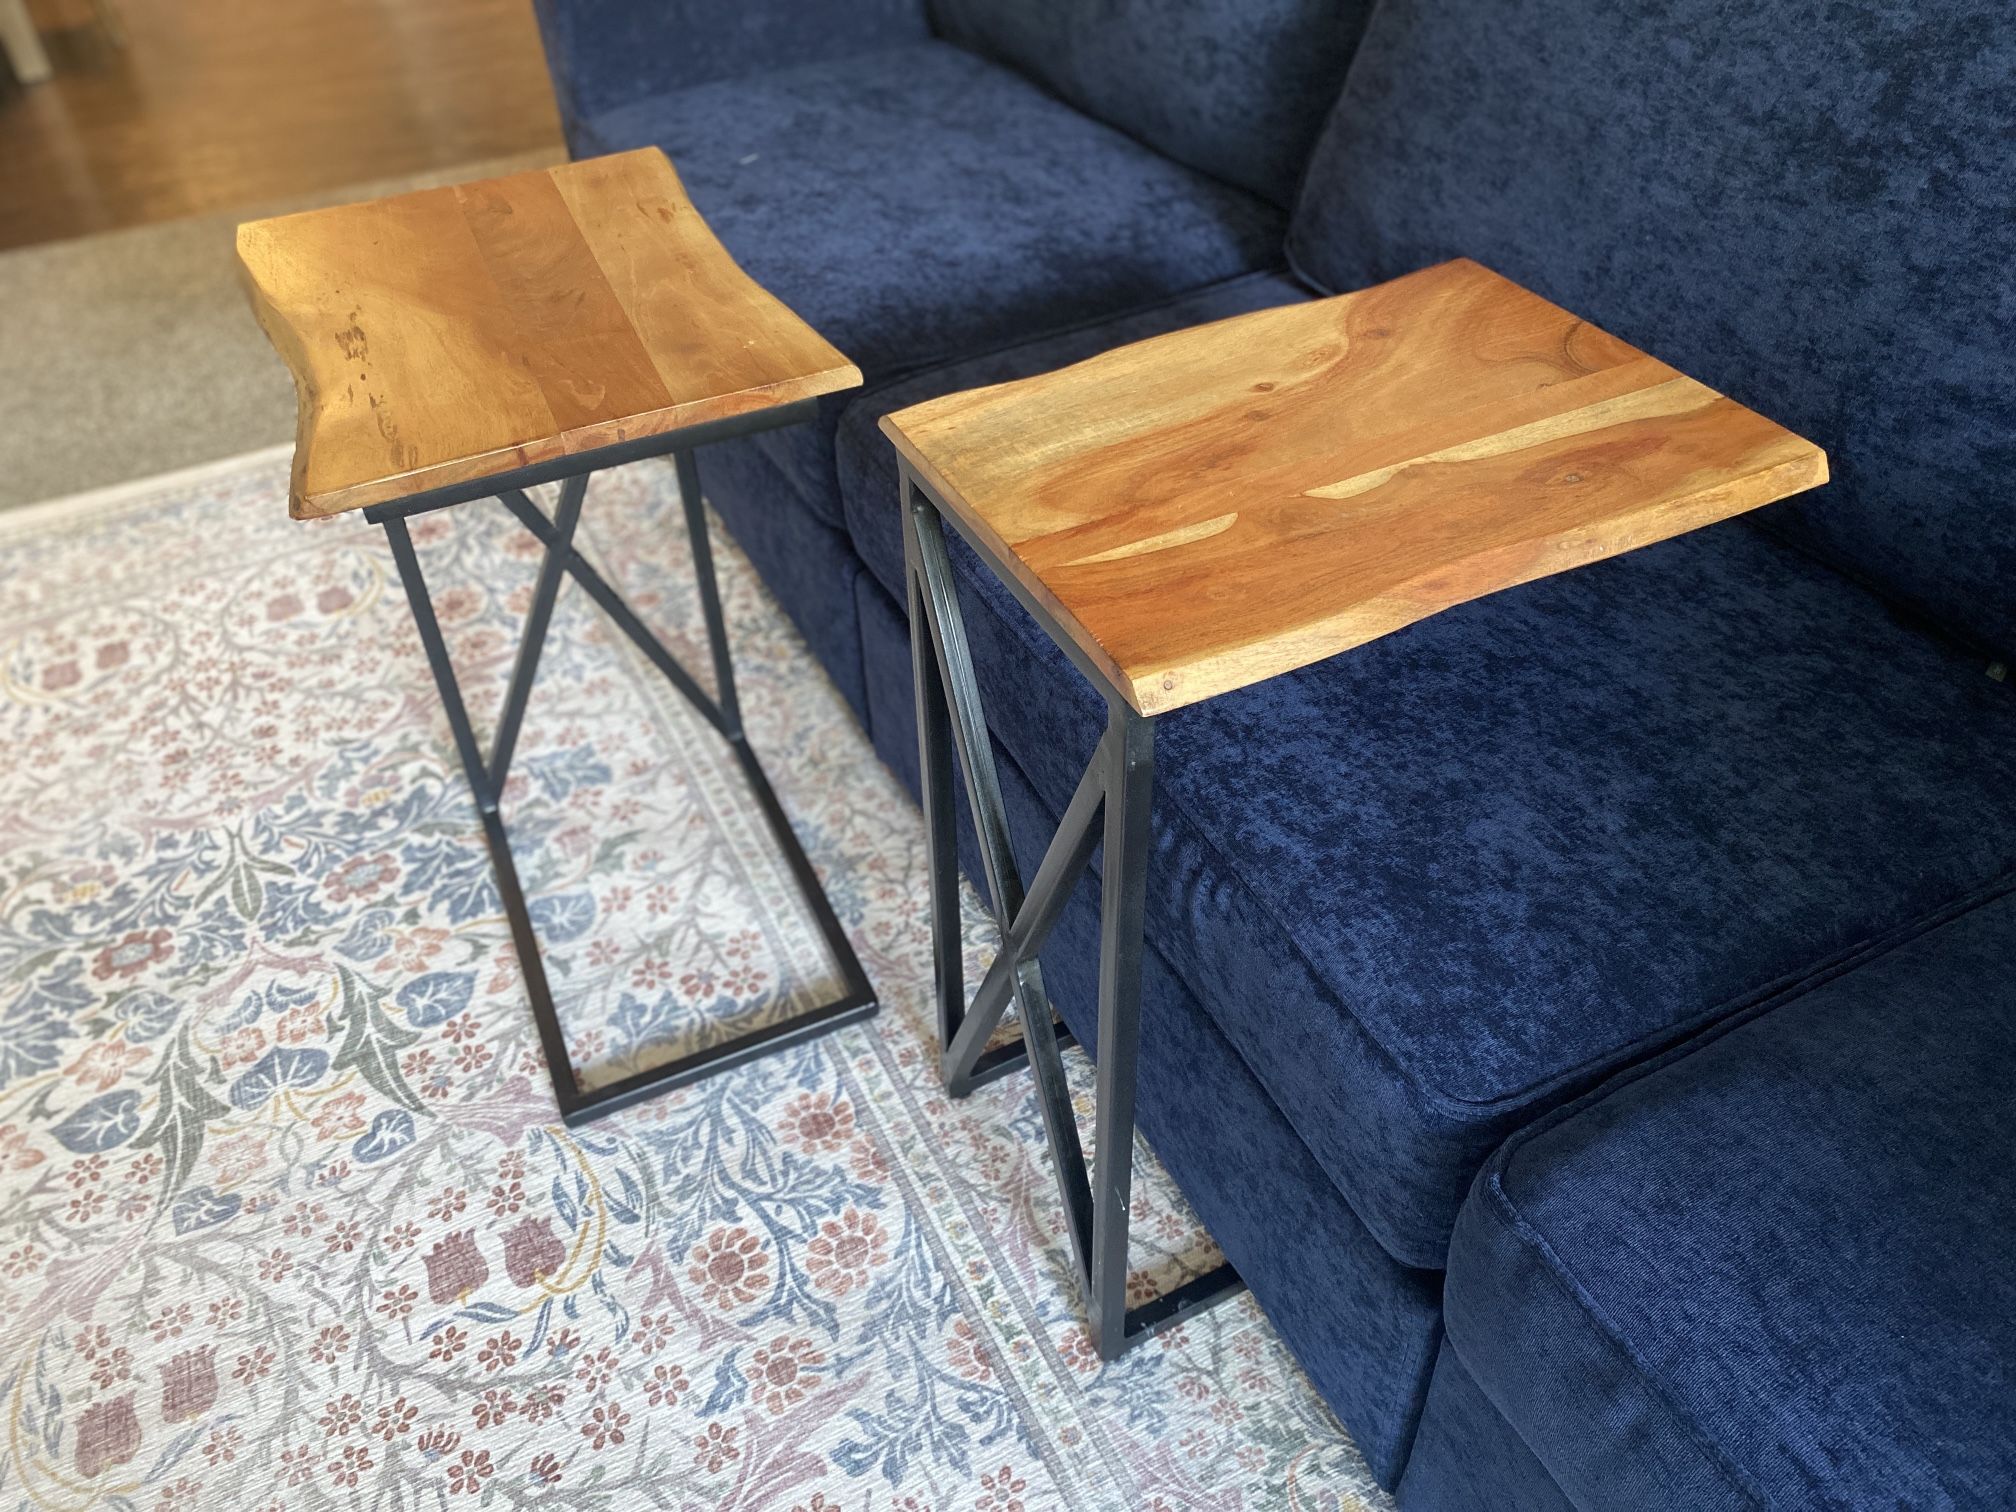 Two End Table/ C Shape Sofa Tables